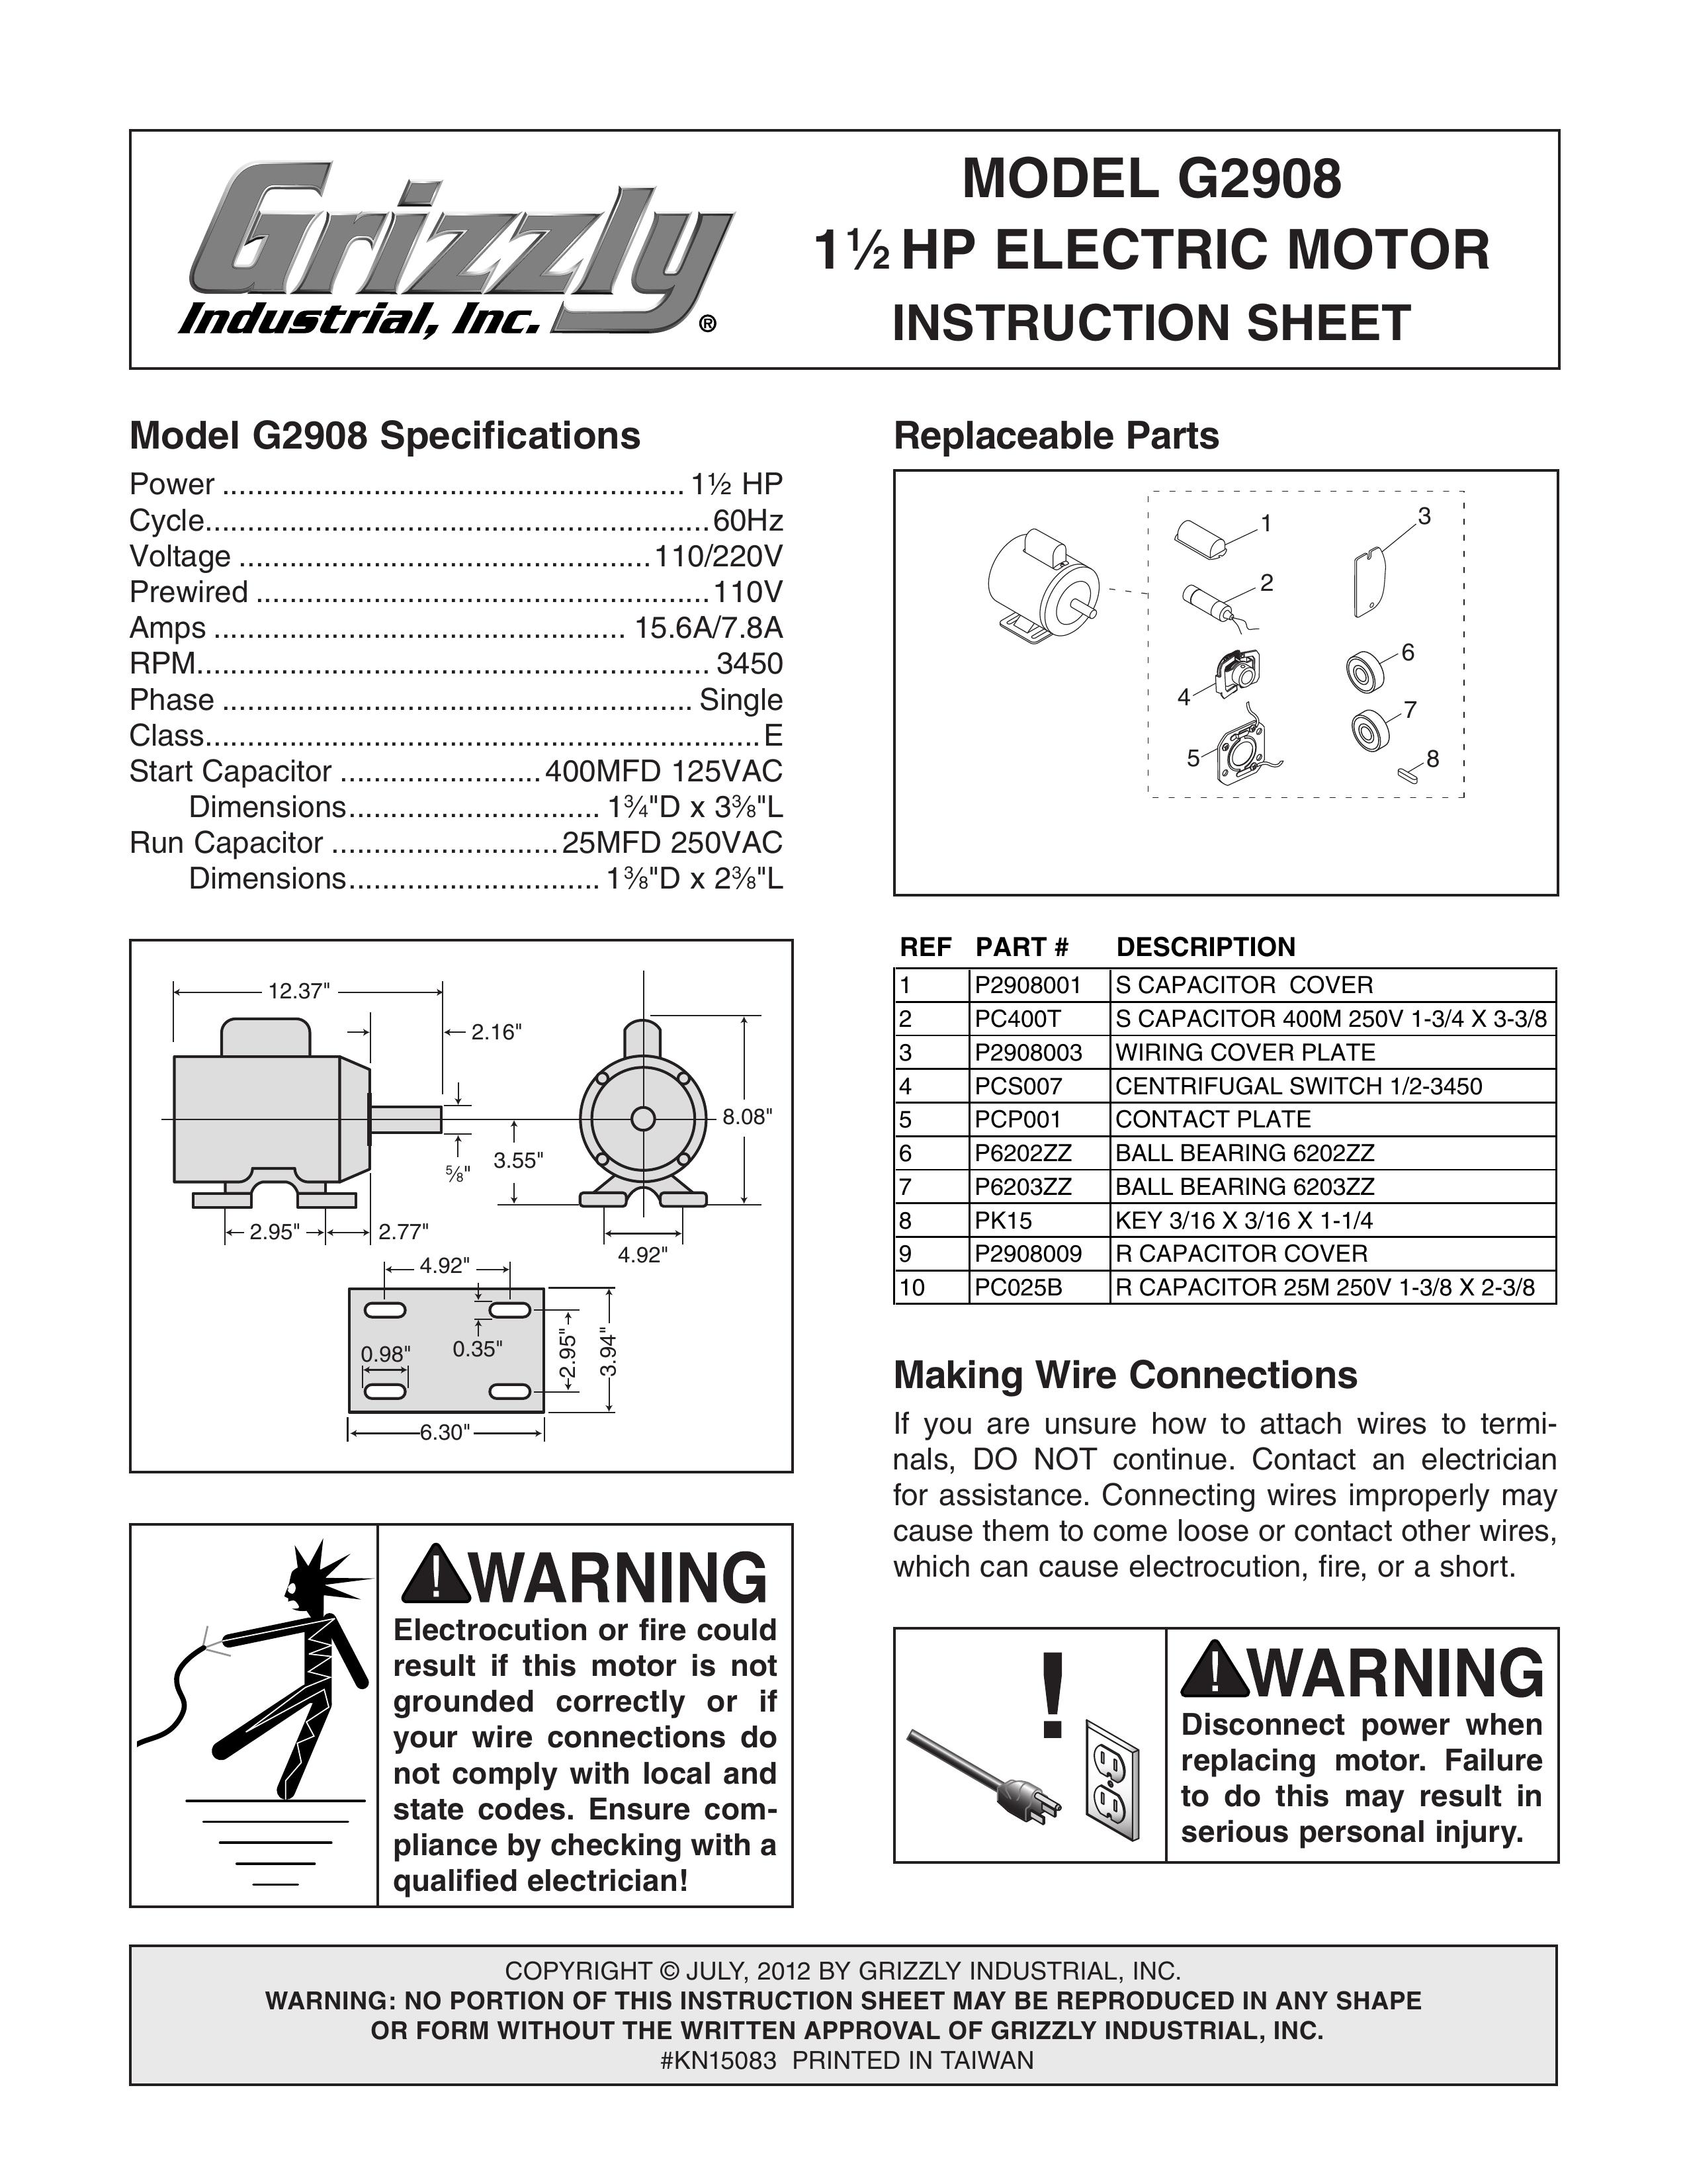 Grizzly G2908 Outboard Motor User Manual